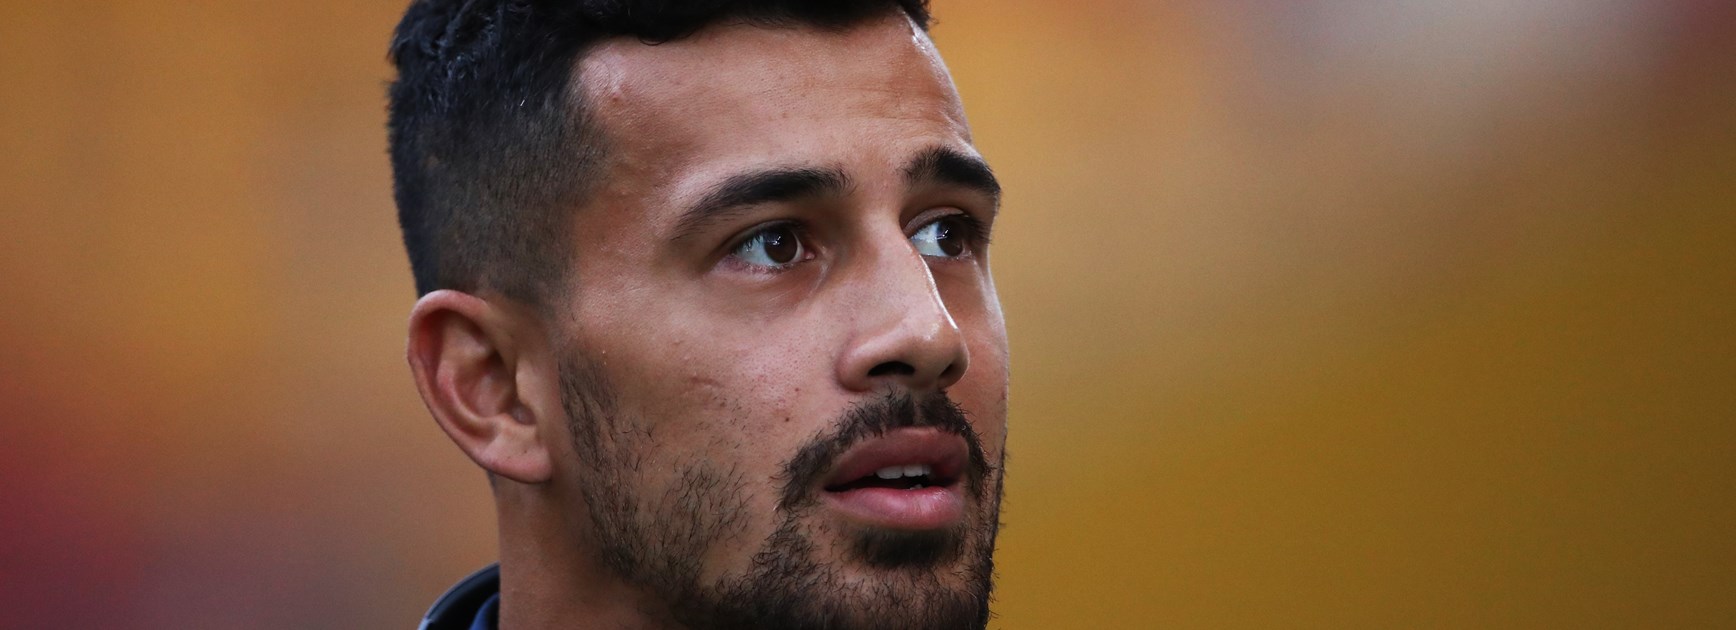 'I just wanted to scream': Kahu on road to recovery ... again